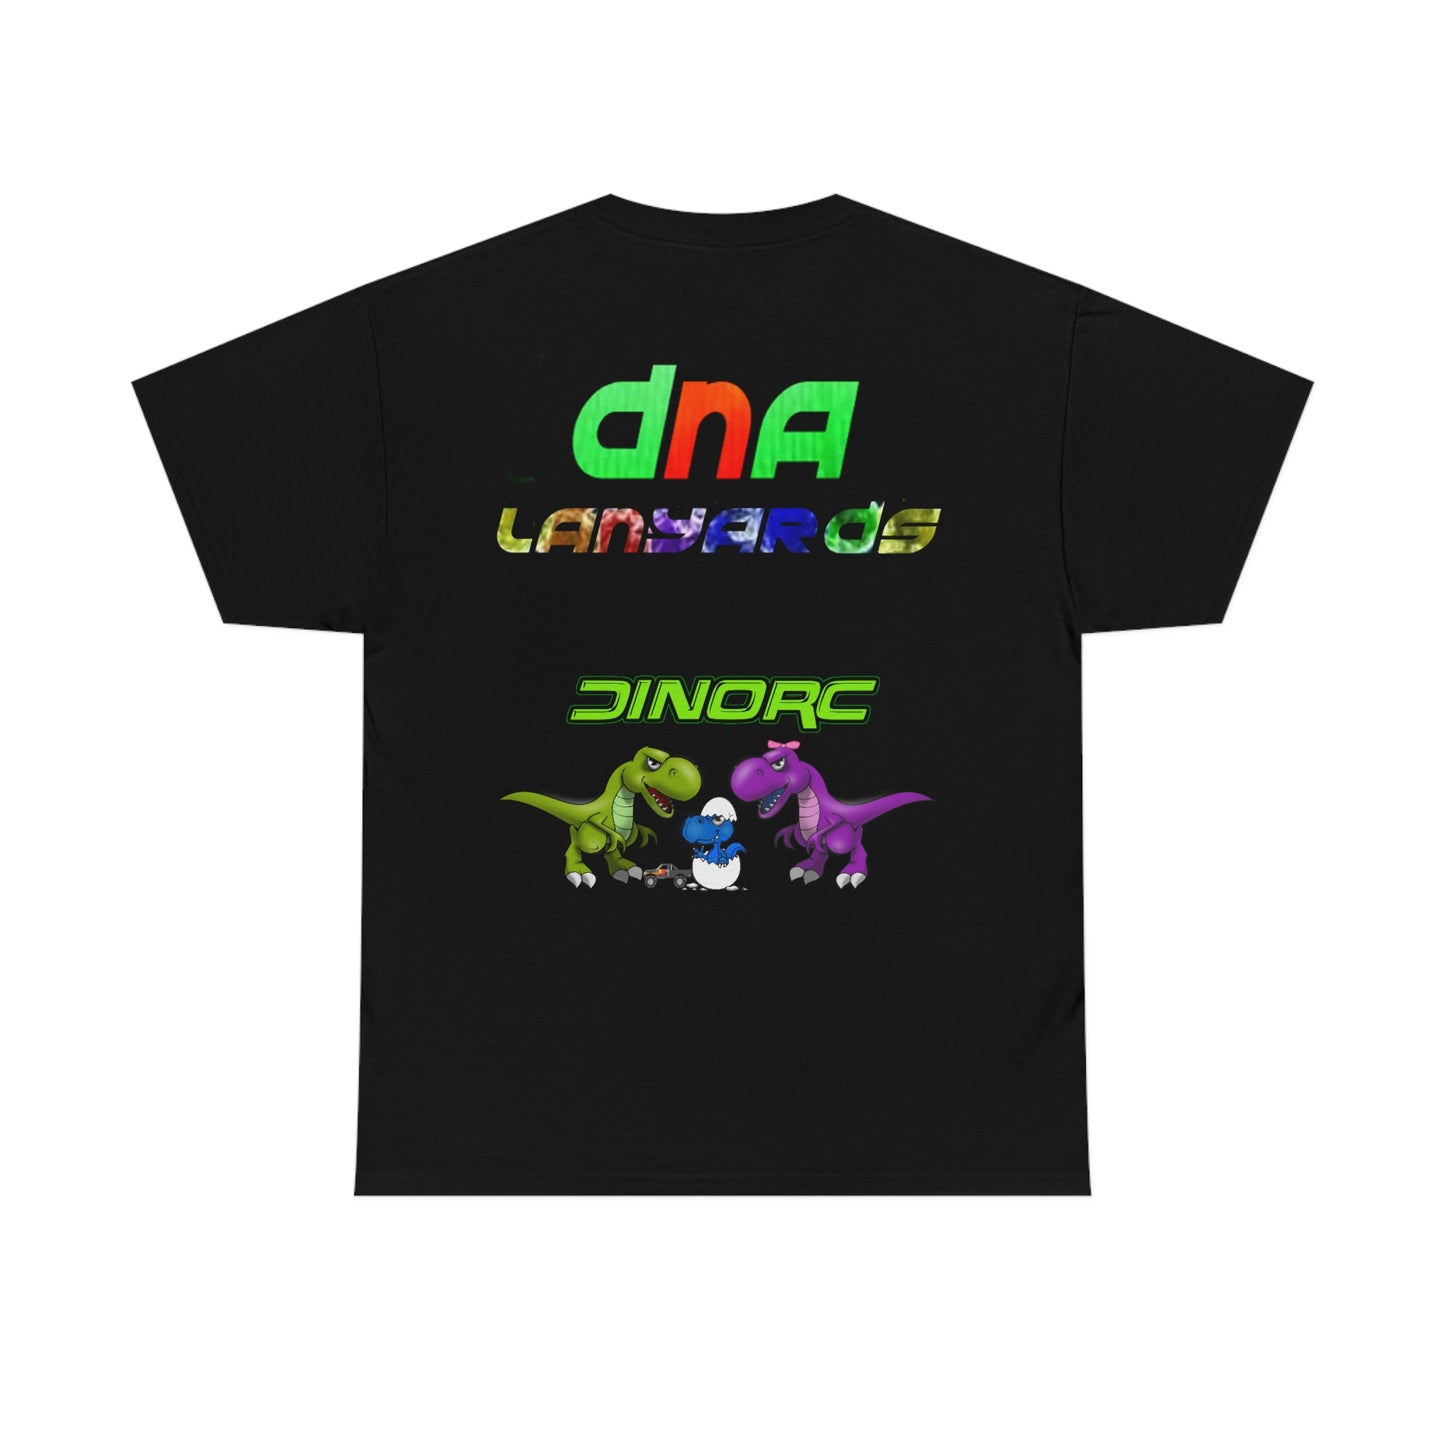 Team Driver DNA Lanyards   Front and Back DinoRc Logo T-Shirt S-5x 5 colors